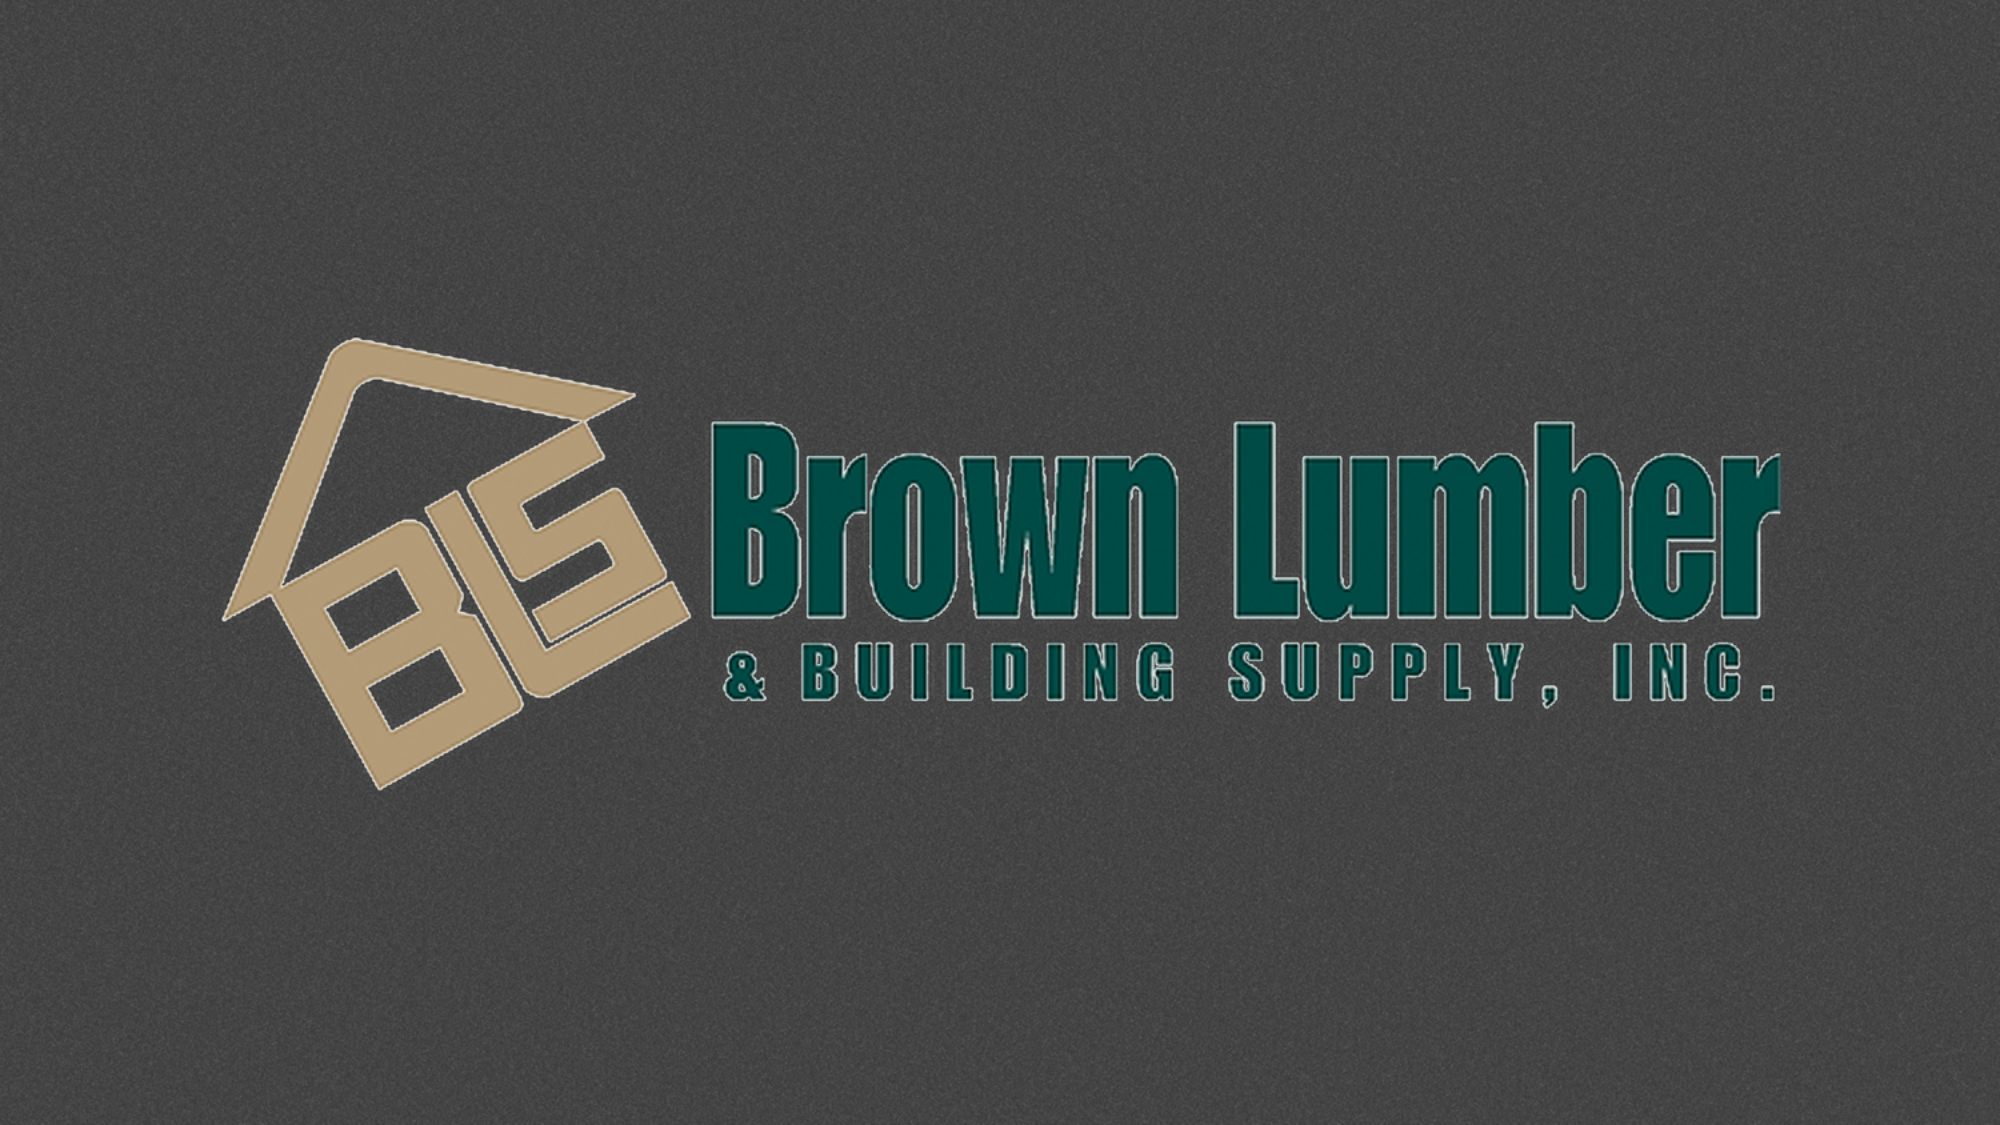 Read our comprehensive review of Brown Lumber and Building Supply, a trusted industry leader since 1950. Discover their commitment to delivering high-quality lumber and building materials and their exceptional value for customers. Partner with Gott Marketing for all your marketing needs in the construction industry.